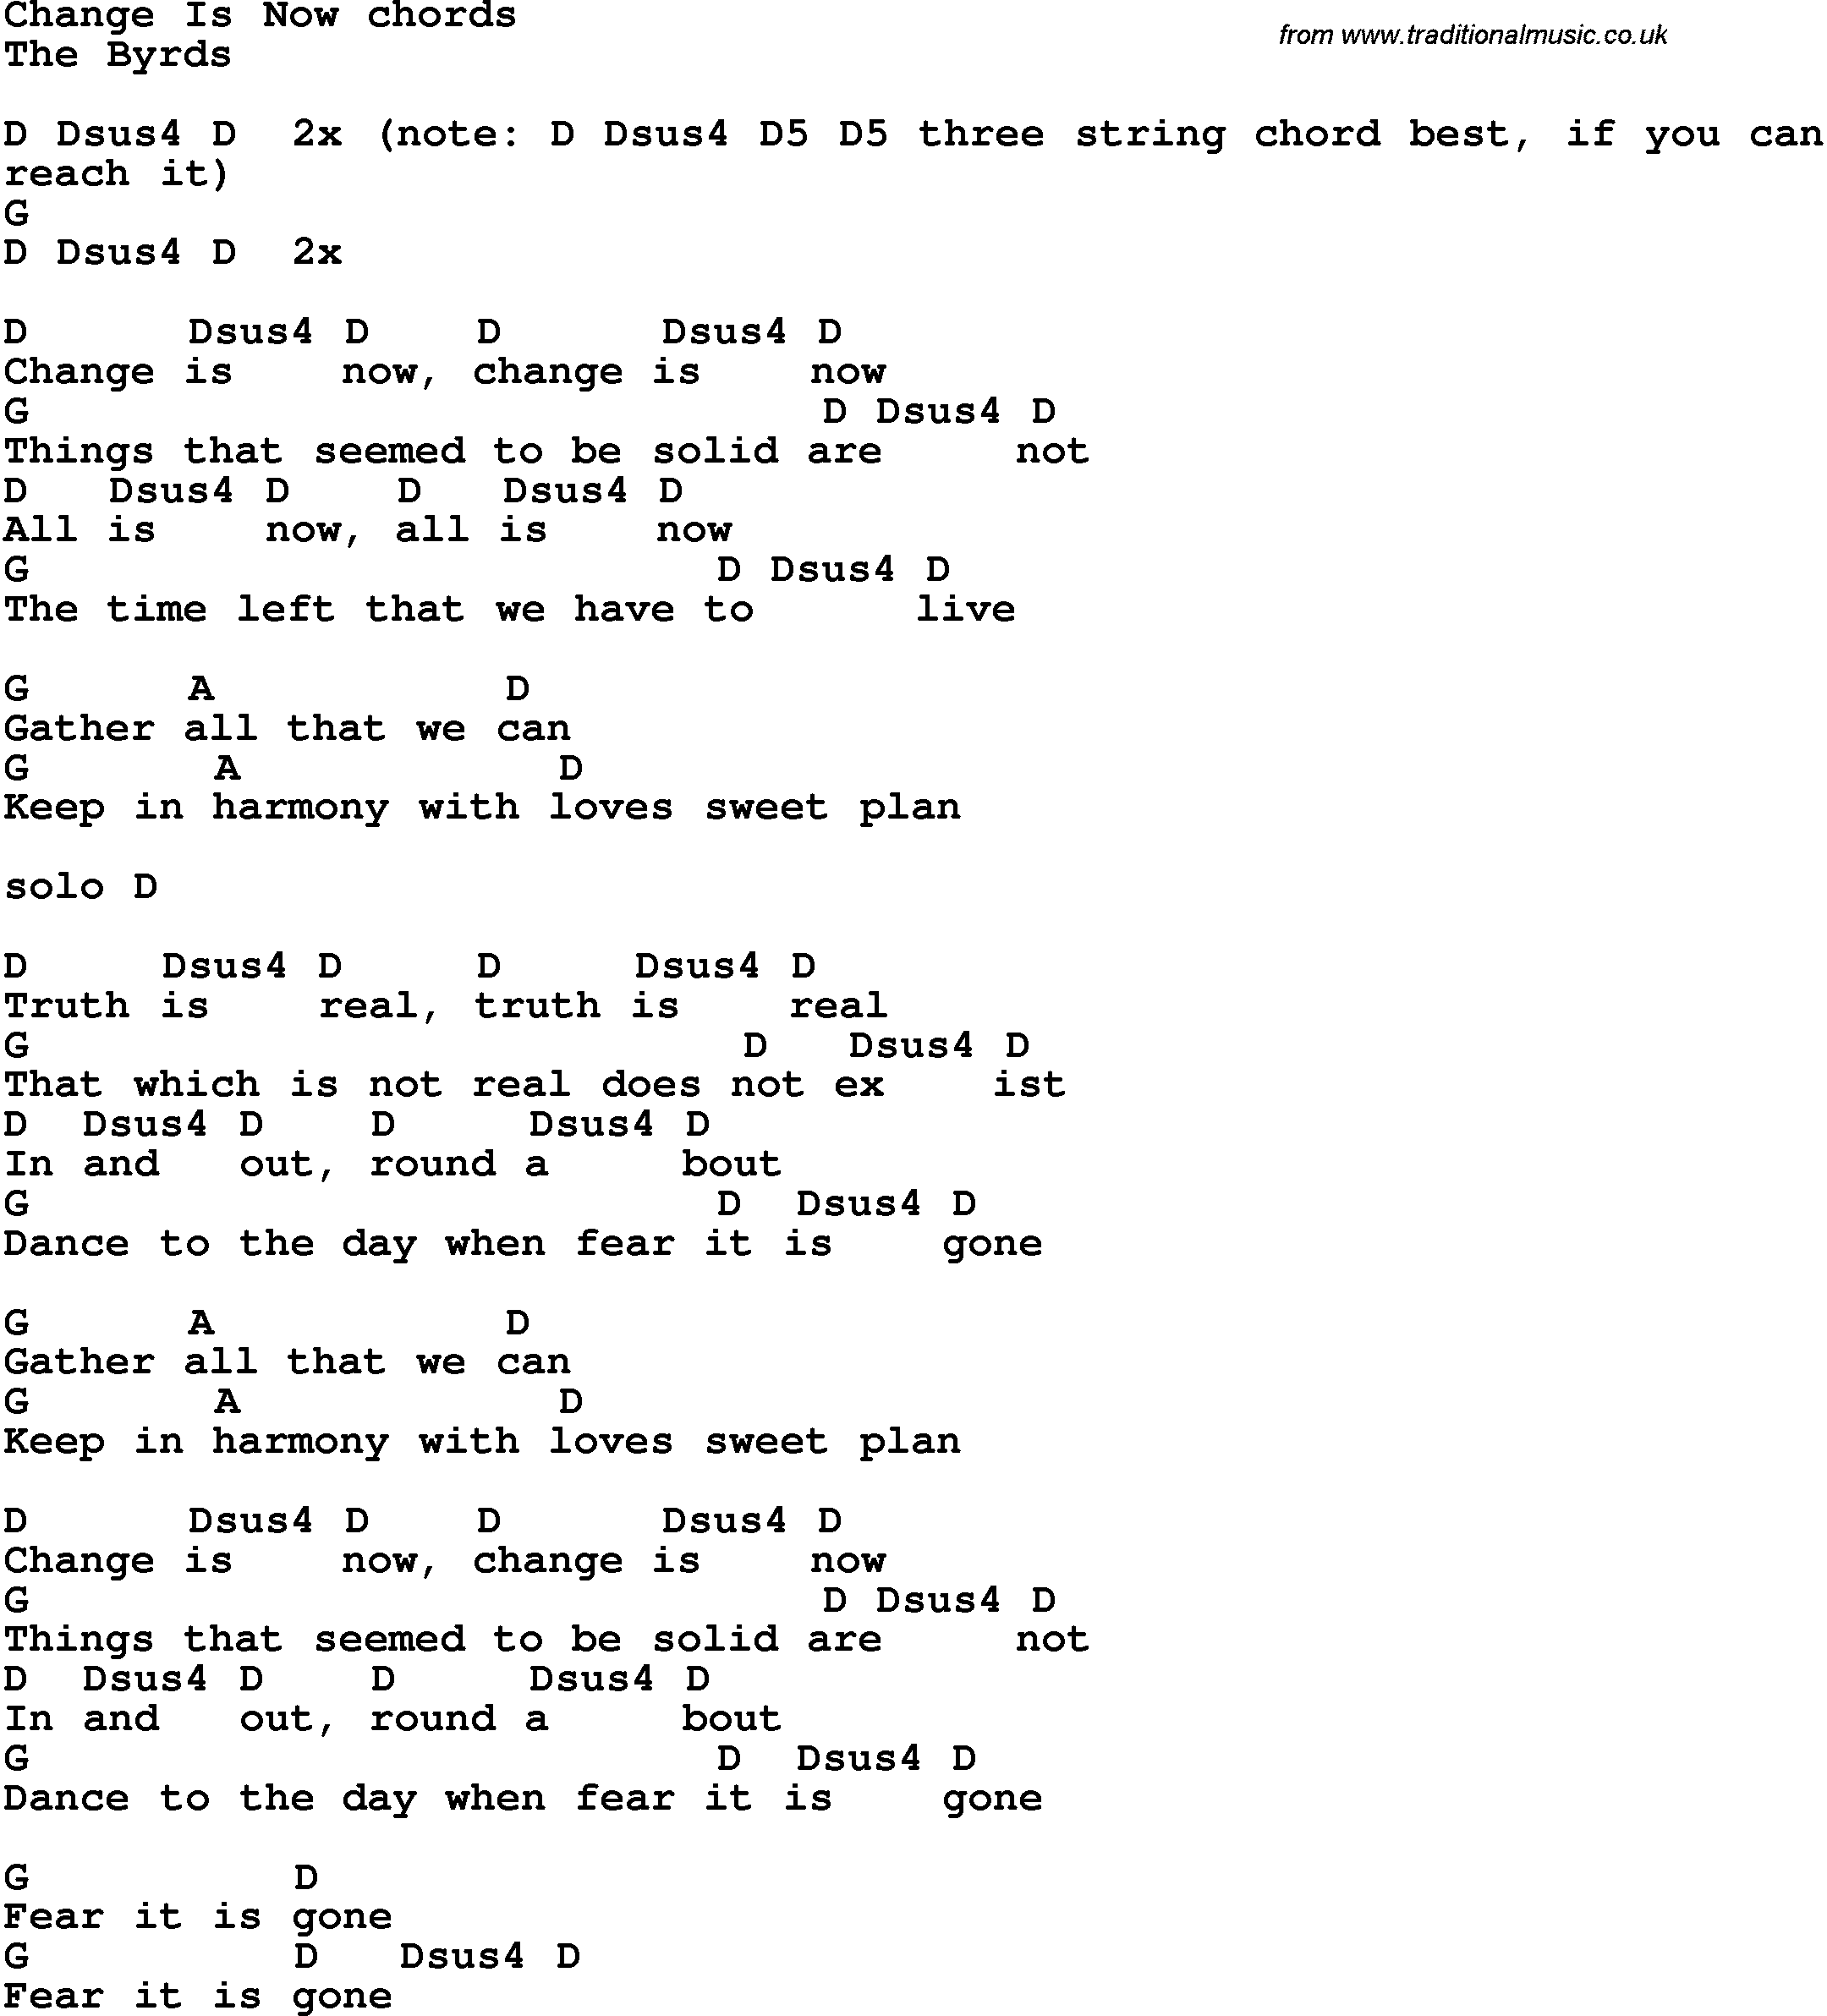 Song Lyrics with guitar chords for Change Is Now